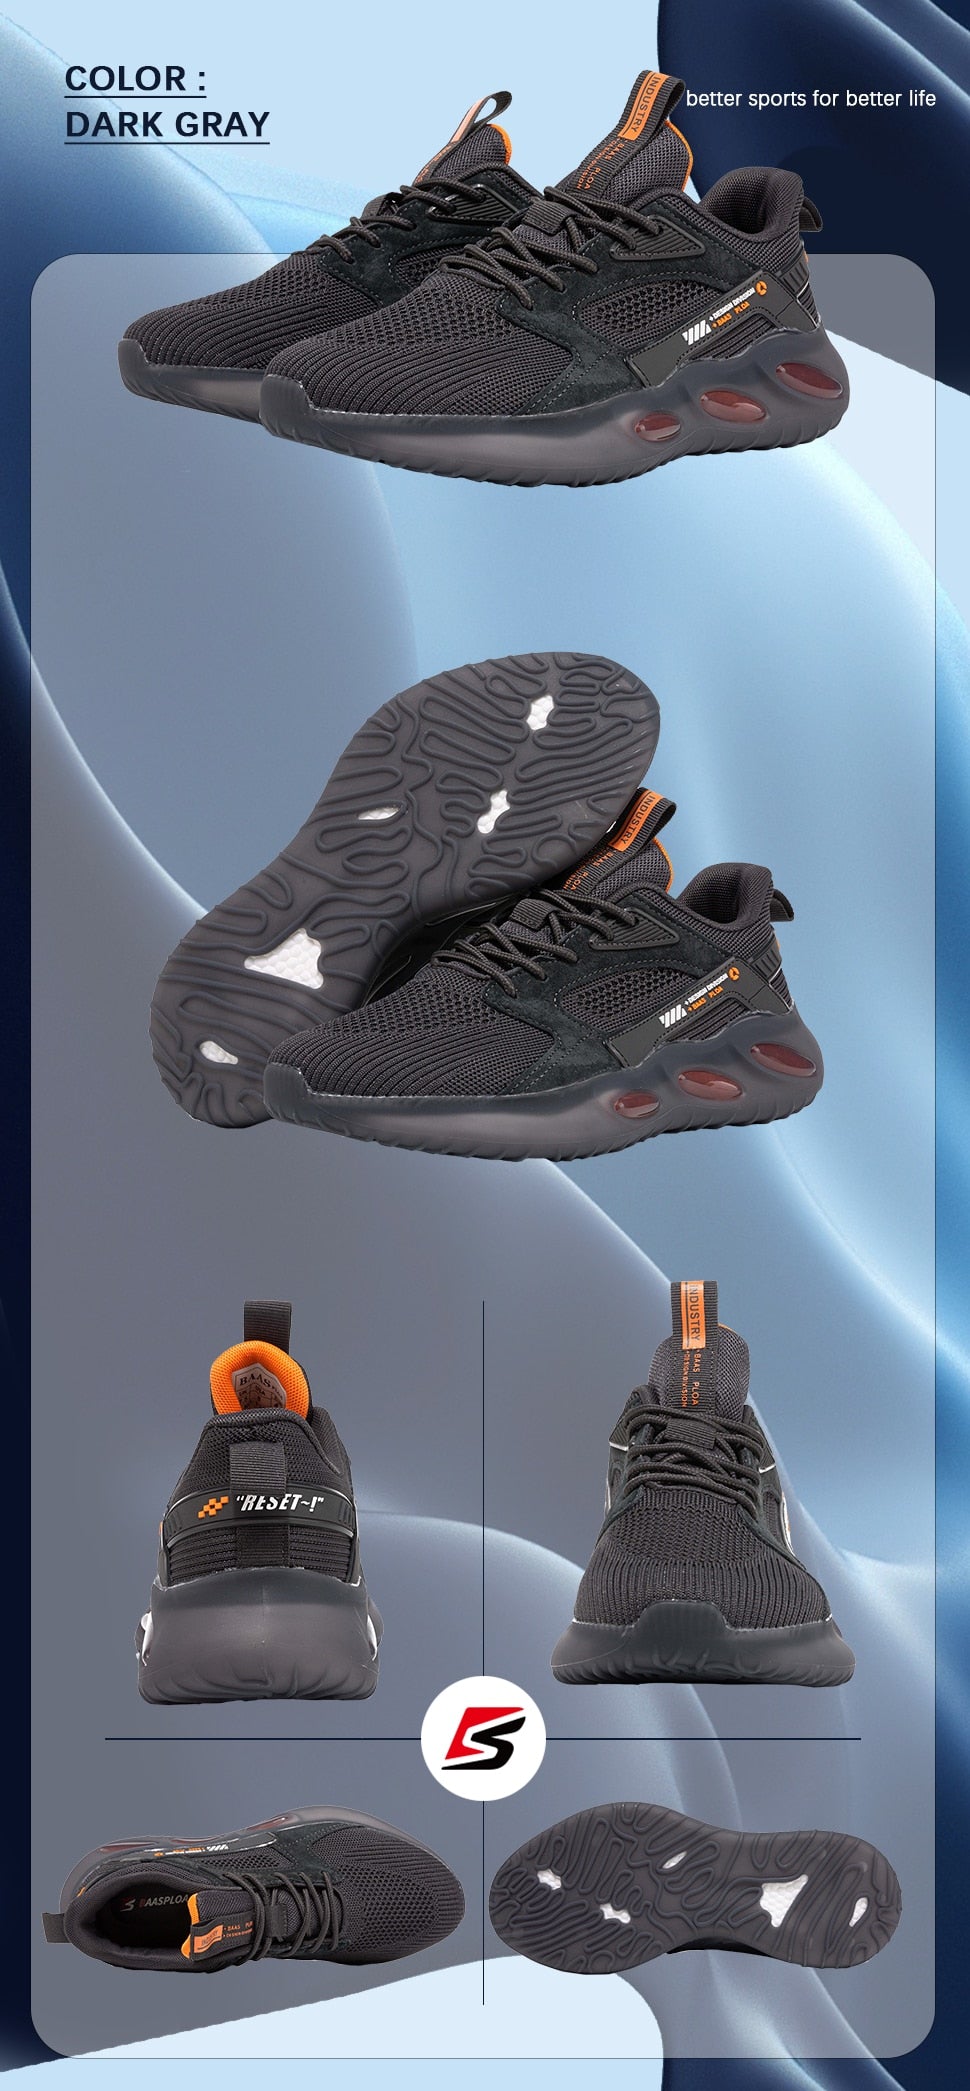 Men's Sneakers Comfortable Breathable Lightweight Running Shoes Anti-slip Shock-absorbing Mesh Casual Walking Shoes The Clothing Company Sydney